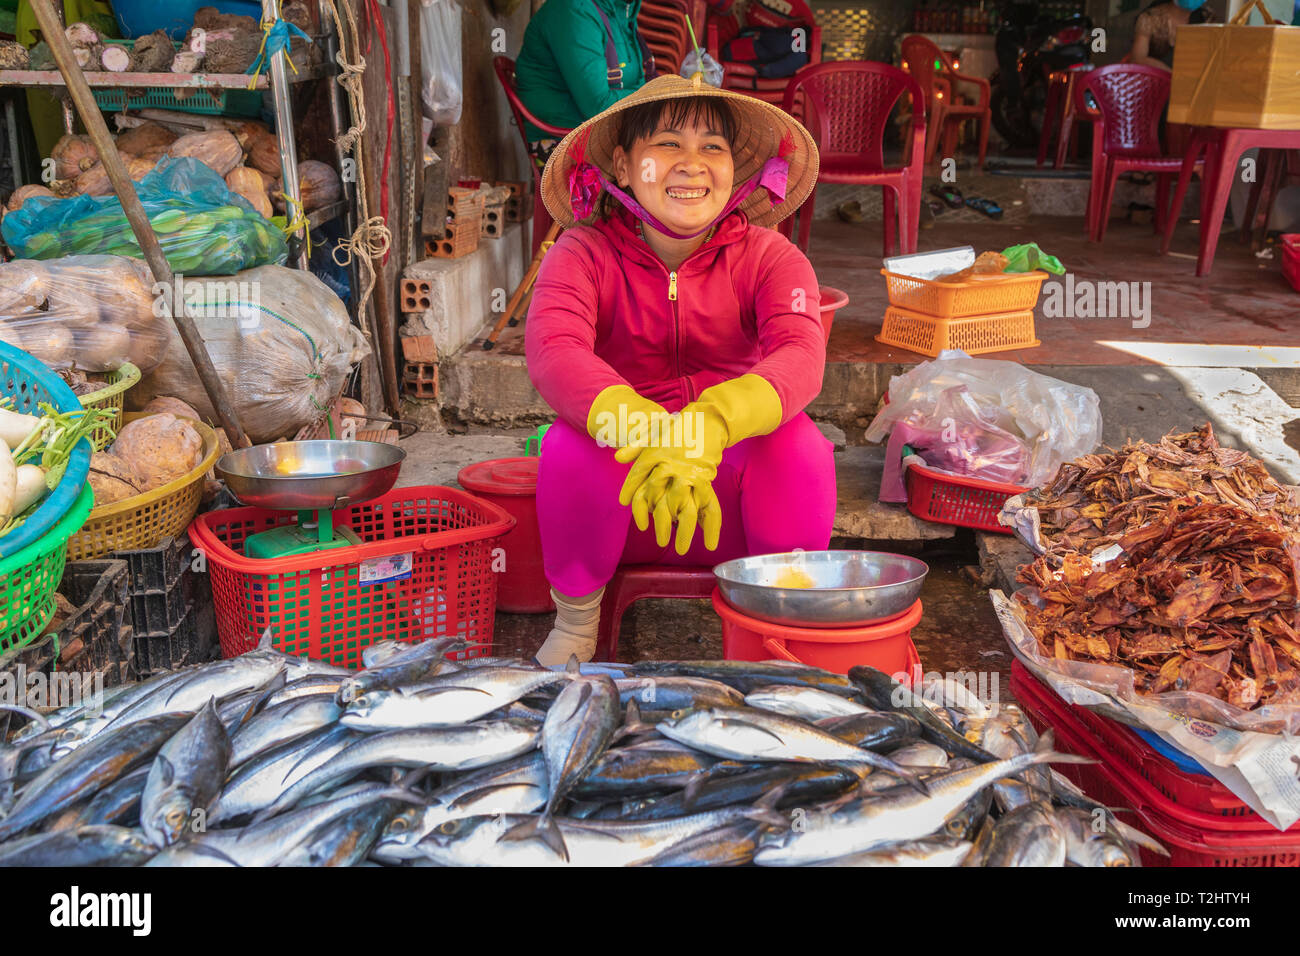 Vietnamese woman selling fish from a street stall at the outdoor street market, Dinh Cau, Phu Quoc Island, Vietnam, Asia, Stock Photo